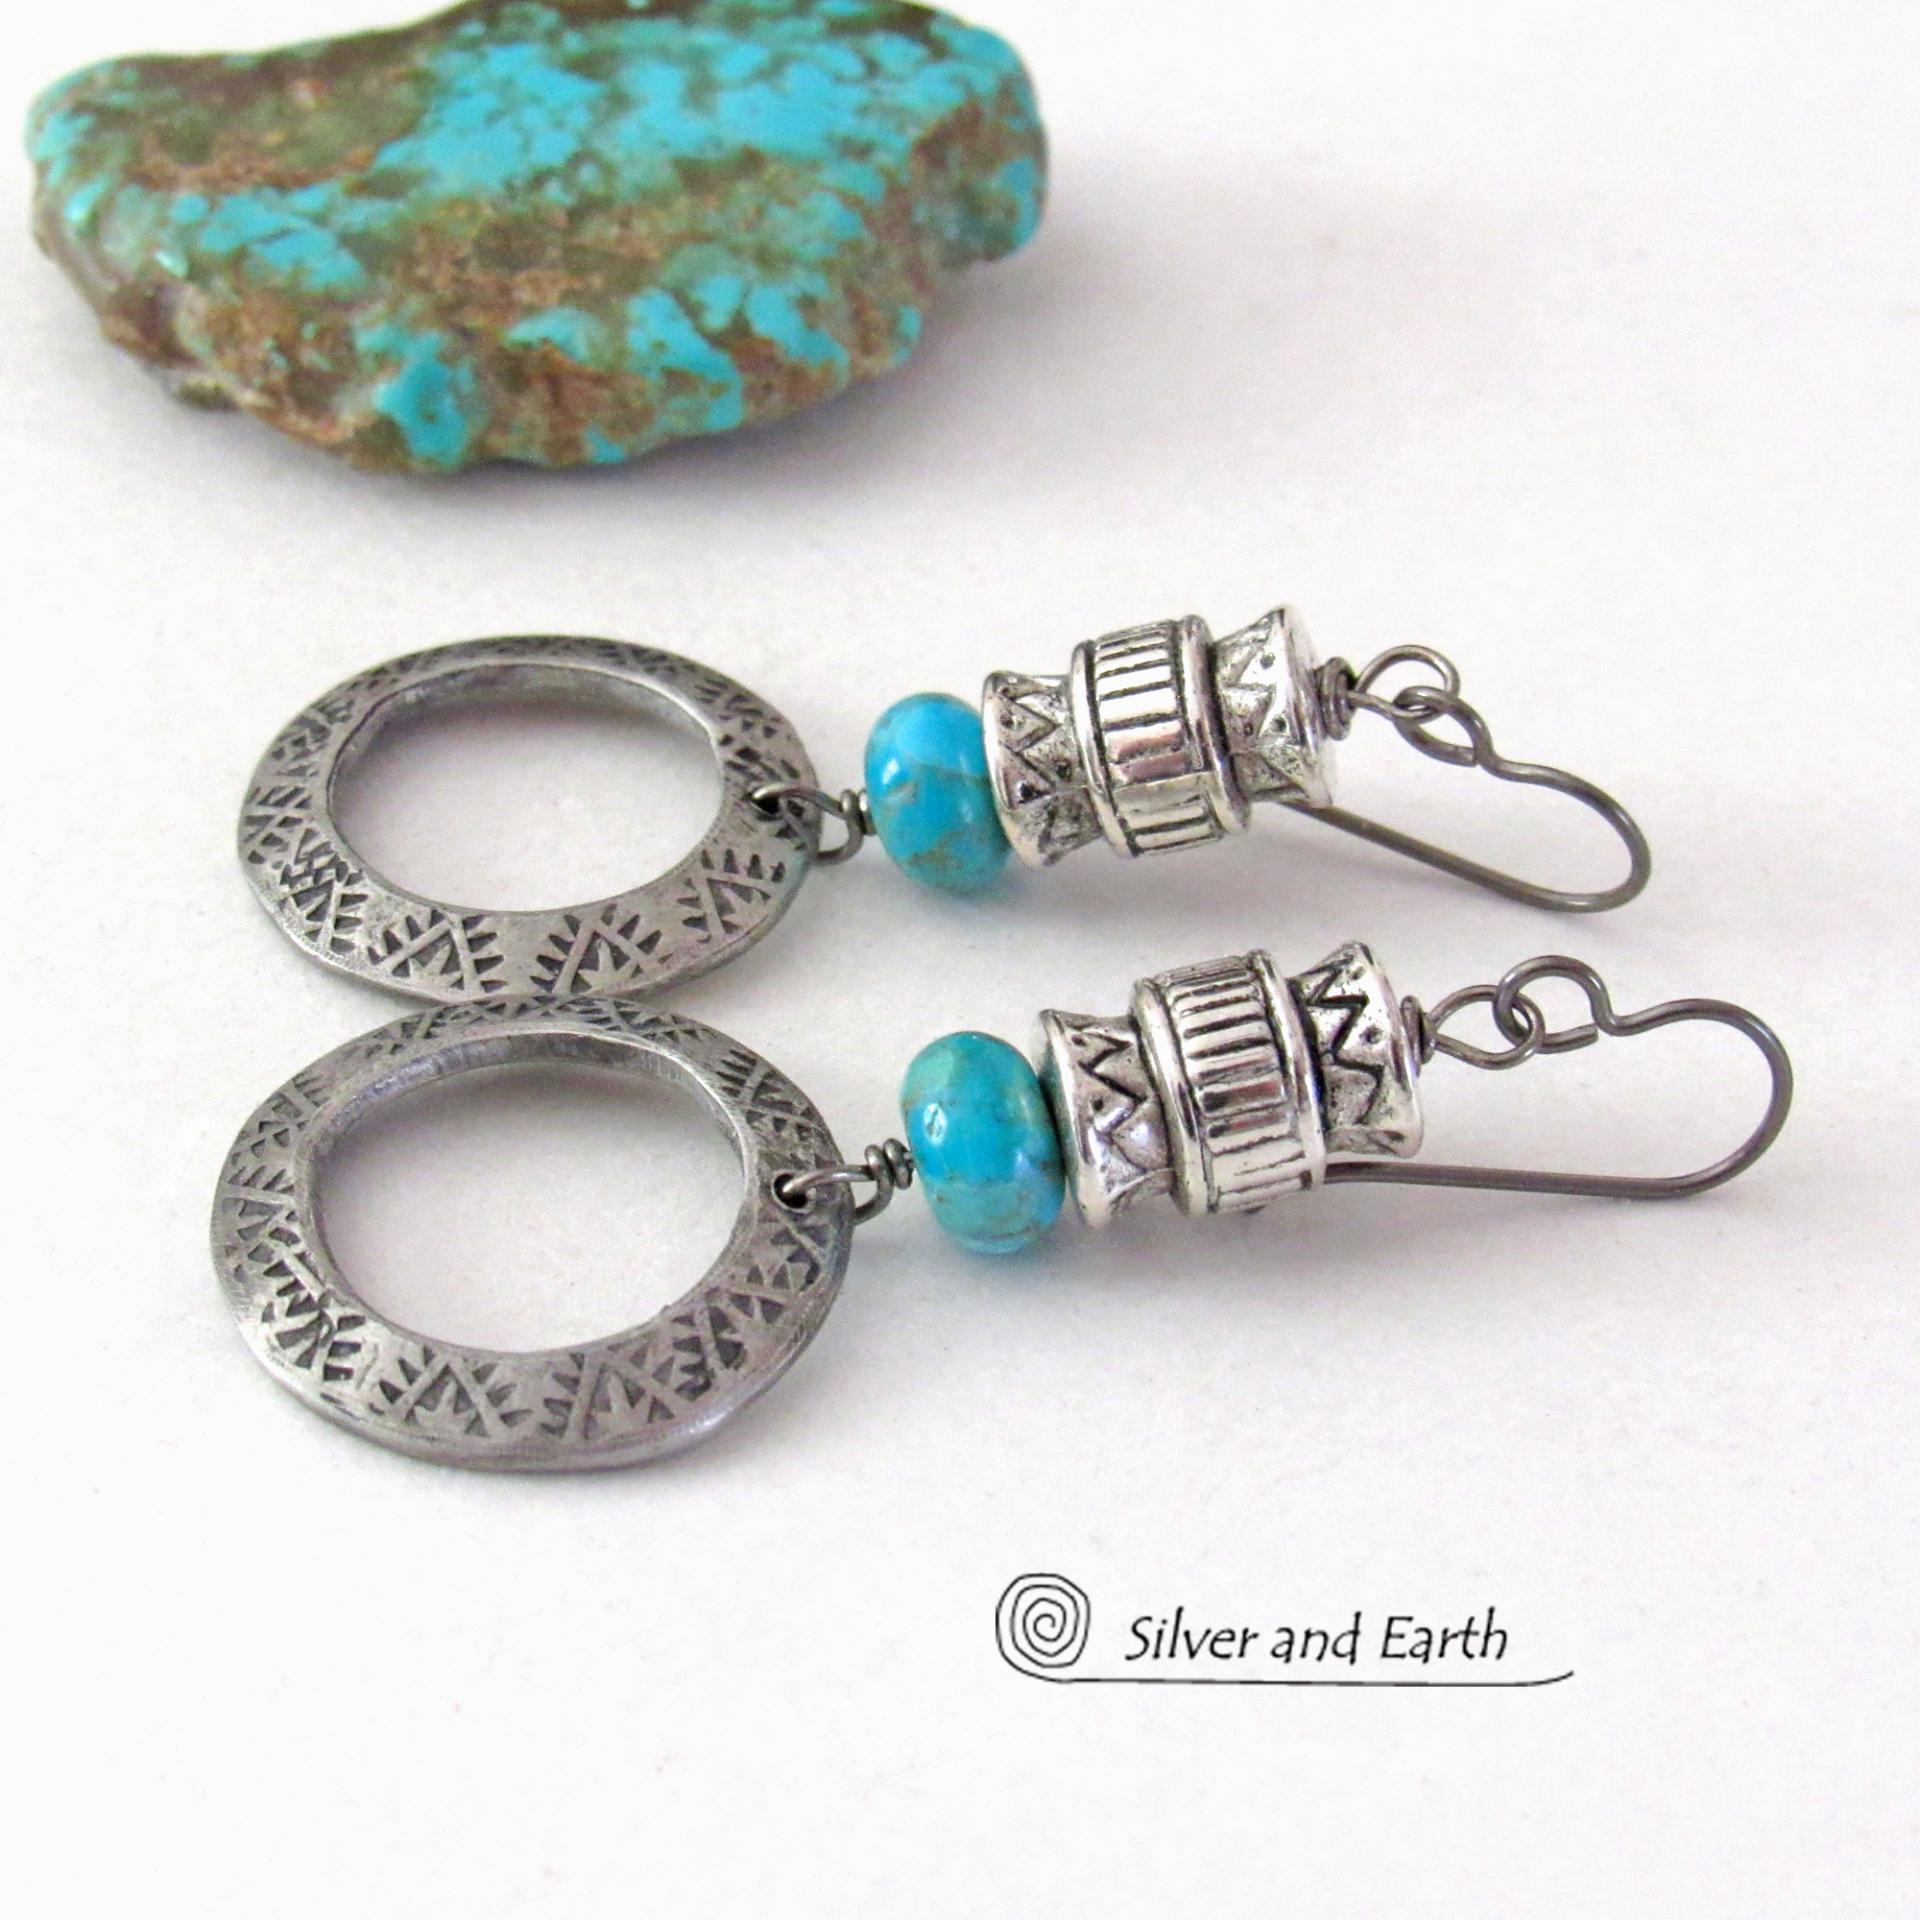 Turquoise and Hand Stamped Silver Pewter Hoop Earrings with Southwestern Tribal Style Beads